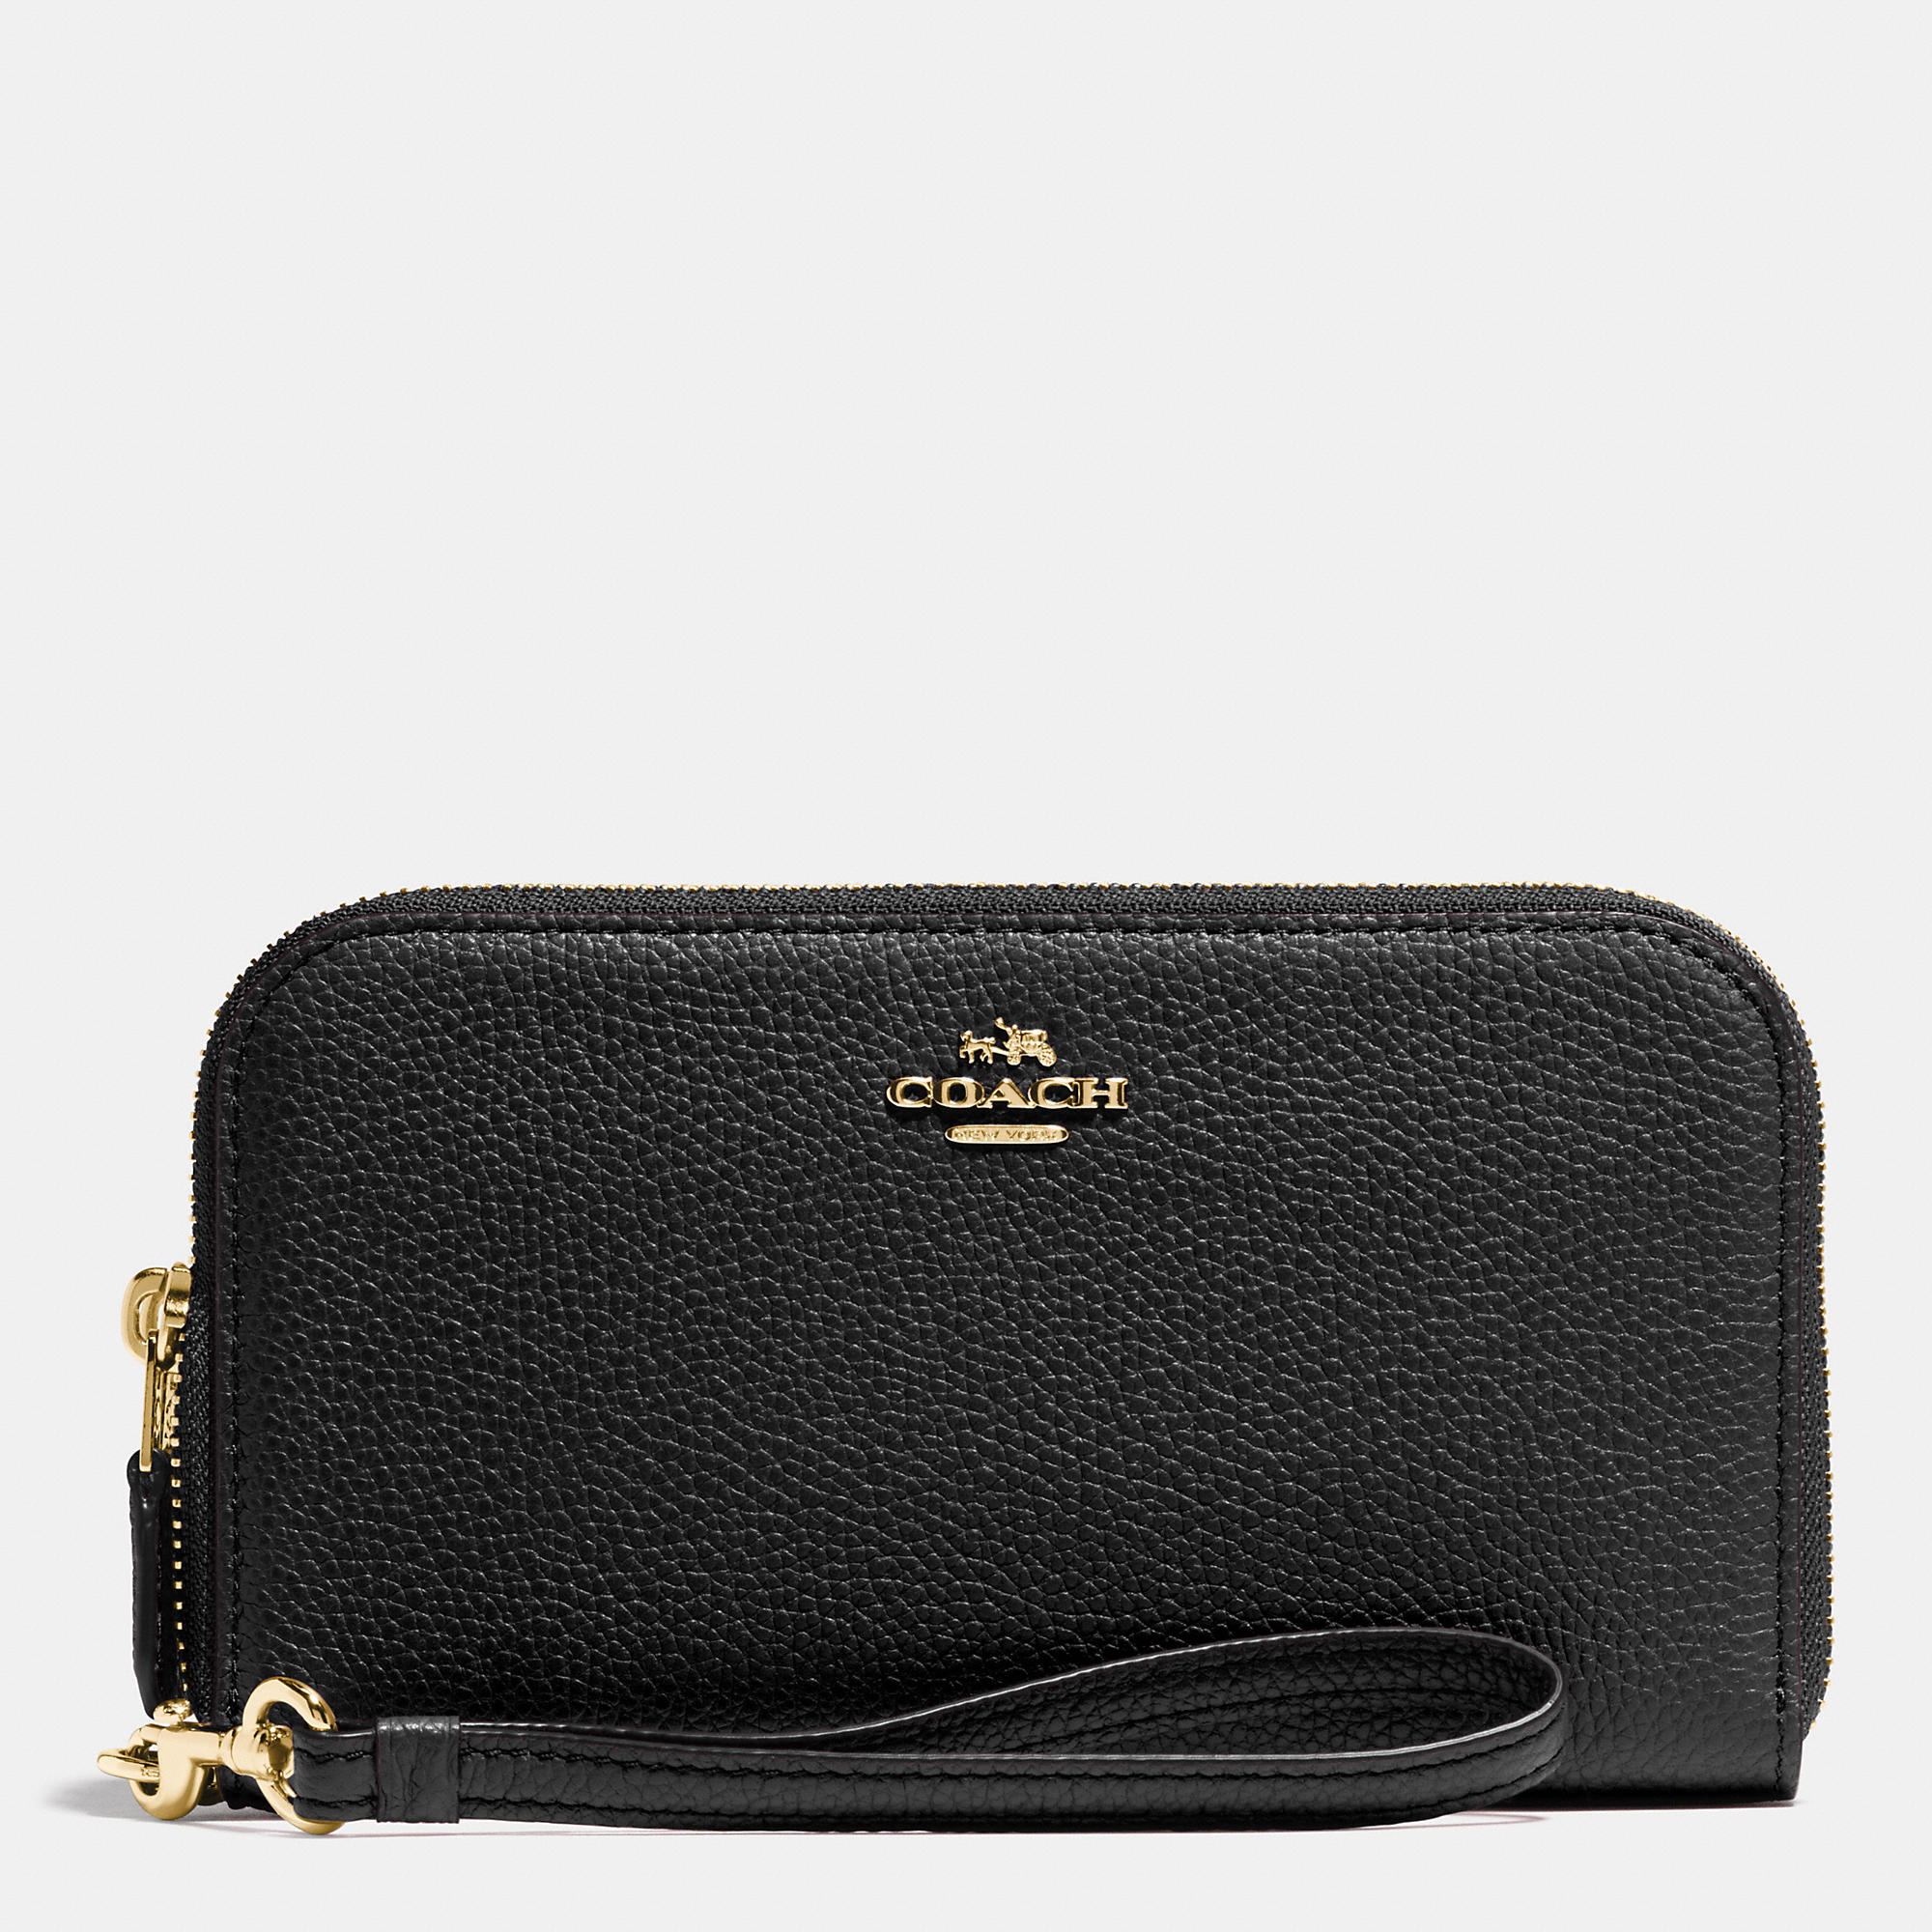 Coach Double Zip Wallet In Polished Pebble Leather in Black | Lyst